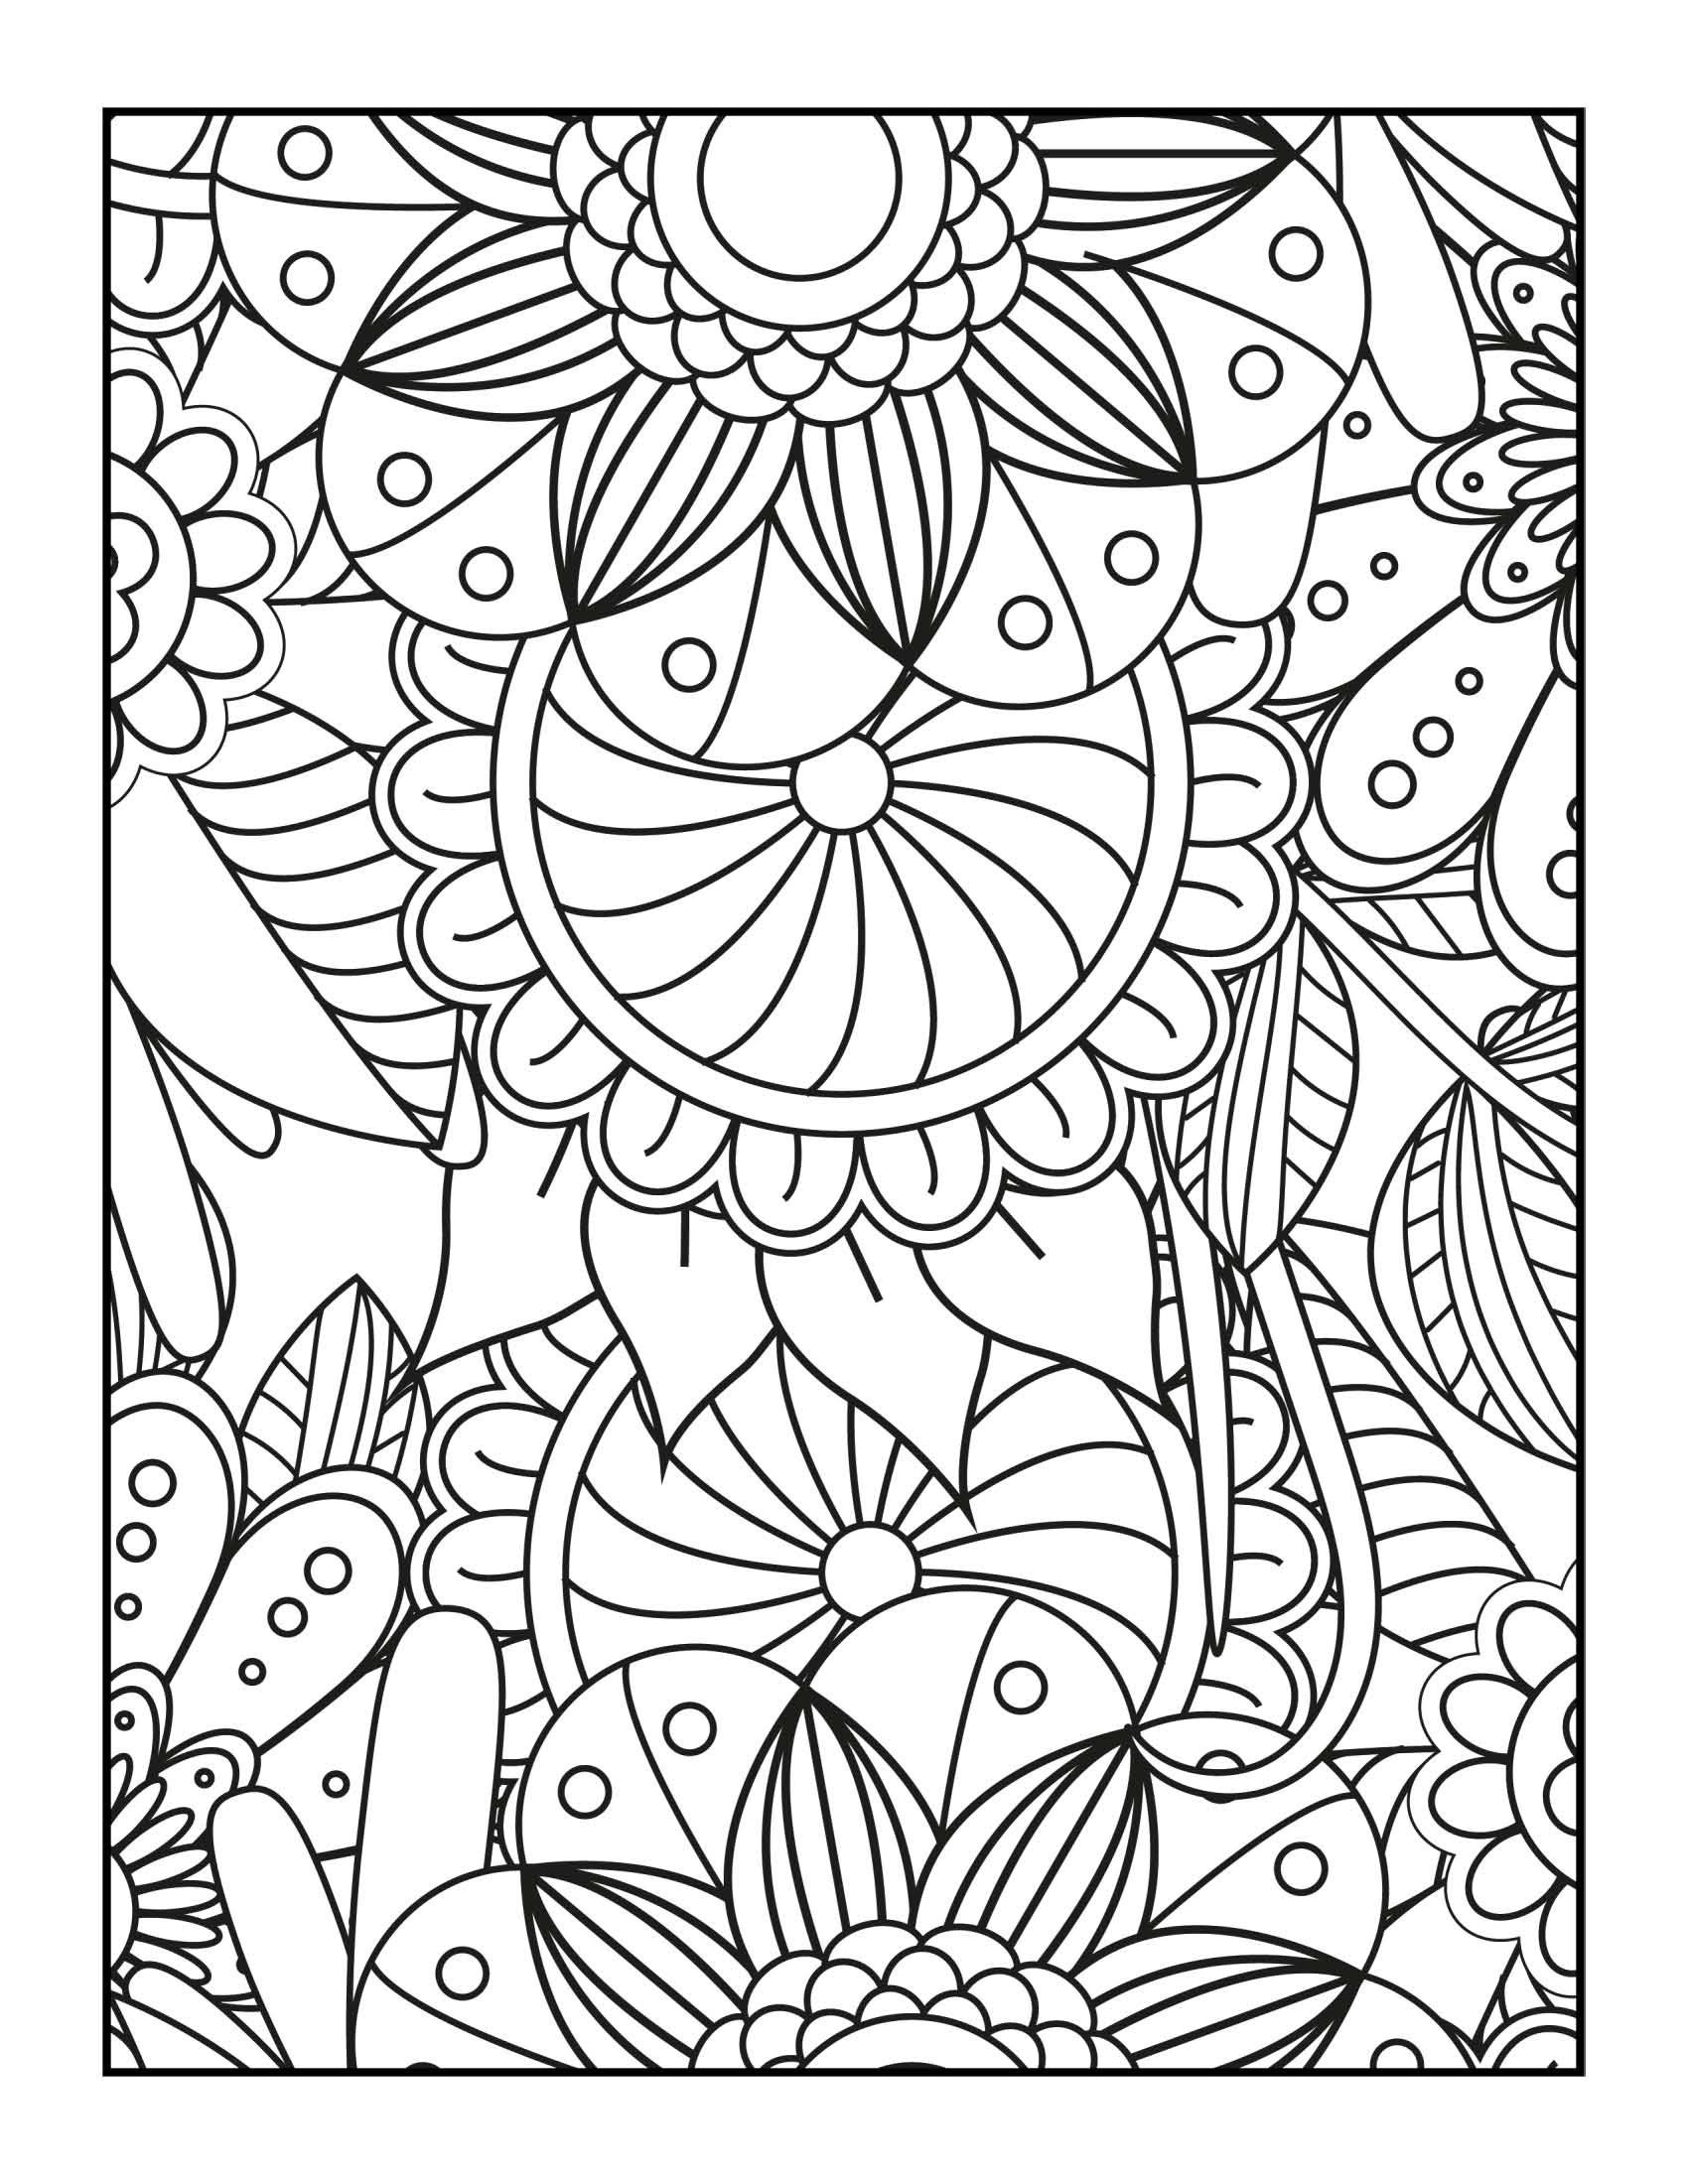  Coloring Books for Adults Relaxation: Adult Coloring Books:  Flowers, Animals and Garden Designs: 9781940282893: Coloring Books for  Adults Relaxation, Tip Top Coloring Books: Books